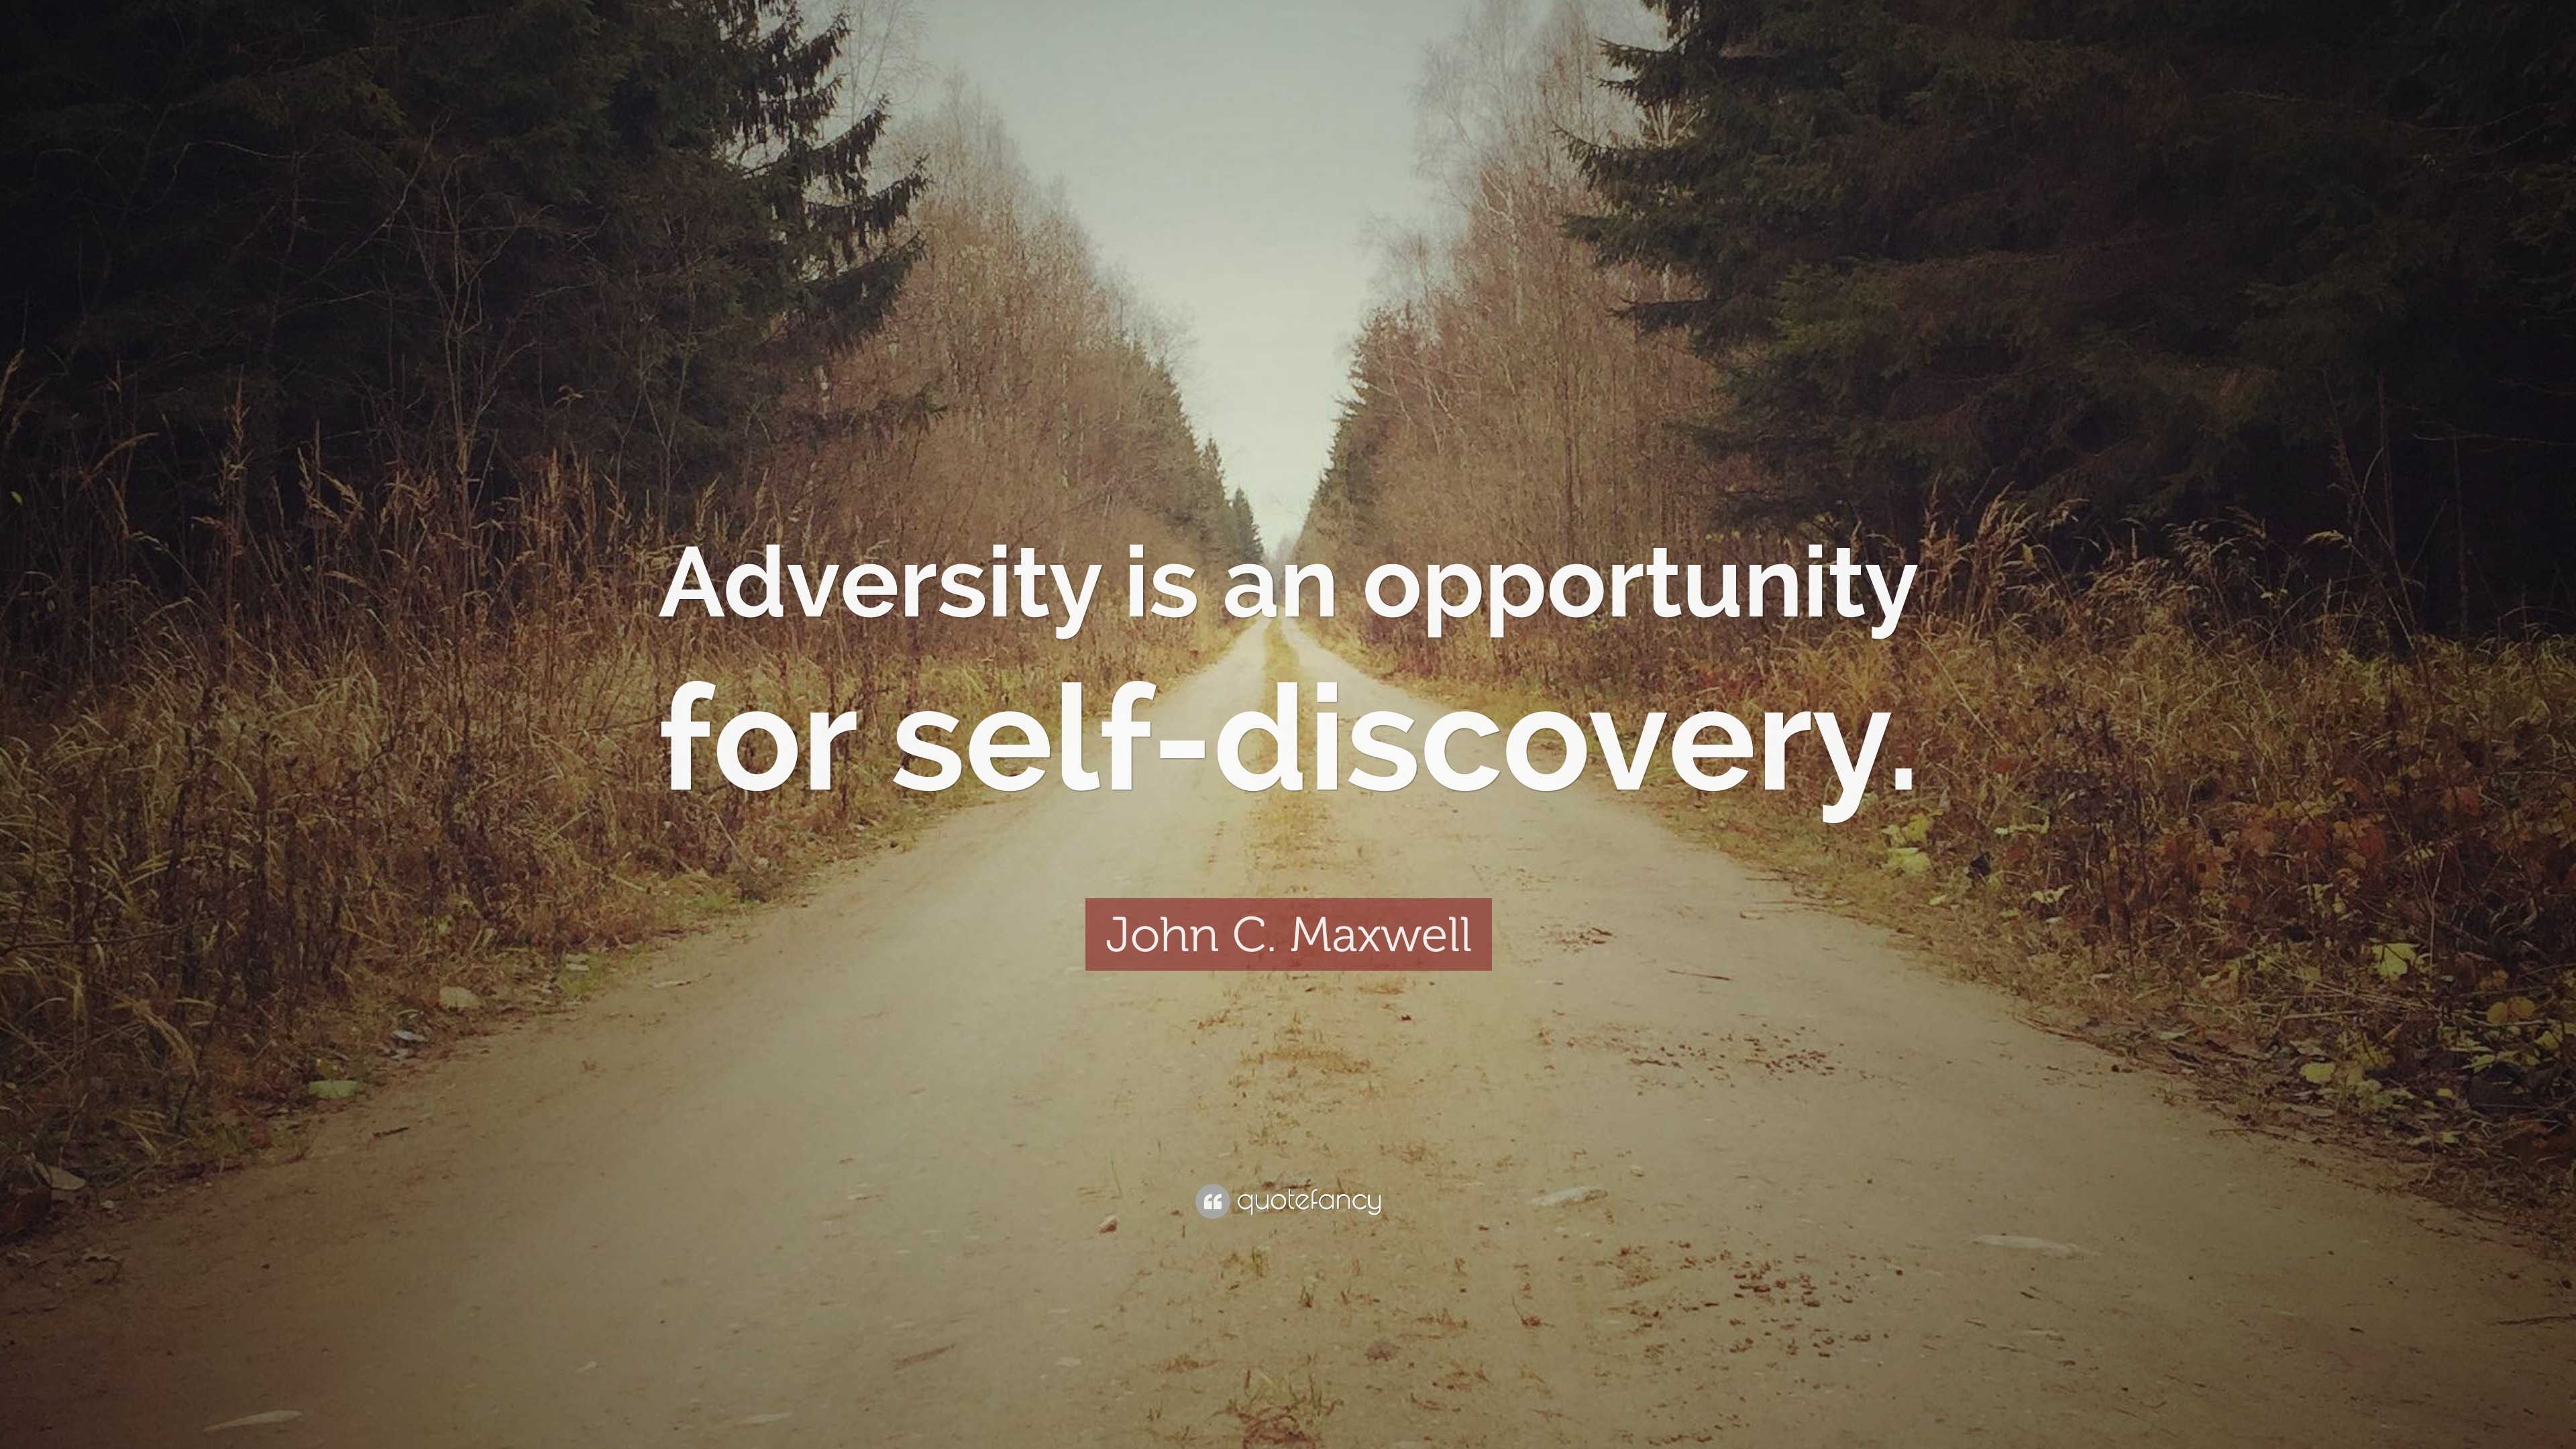 John C. Maxwell Quote “Adversity is an opportunity for